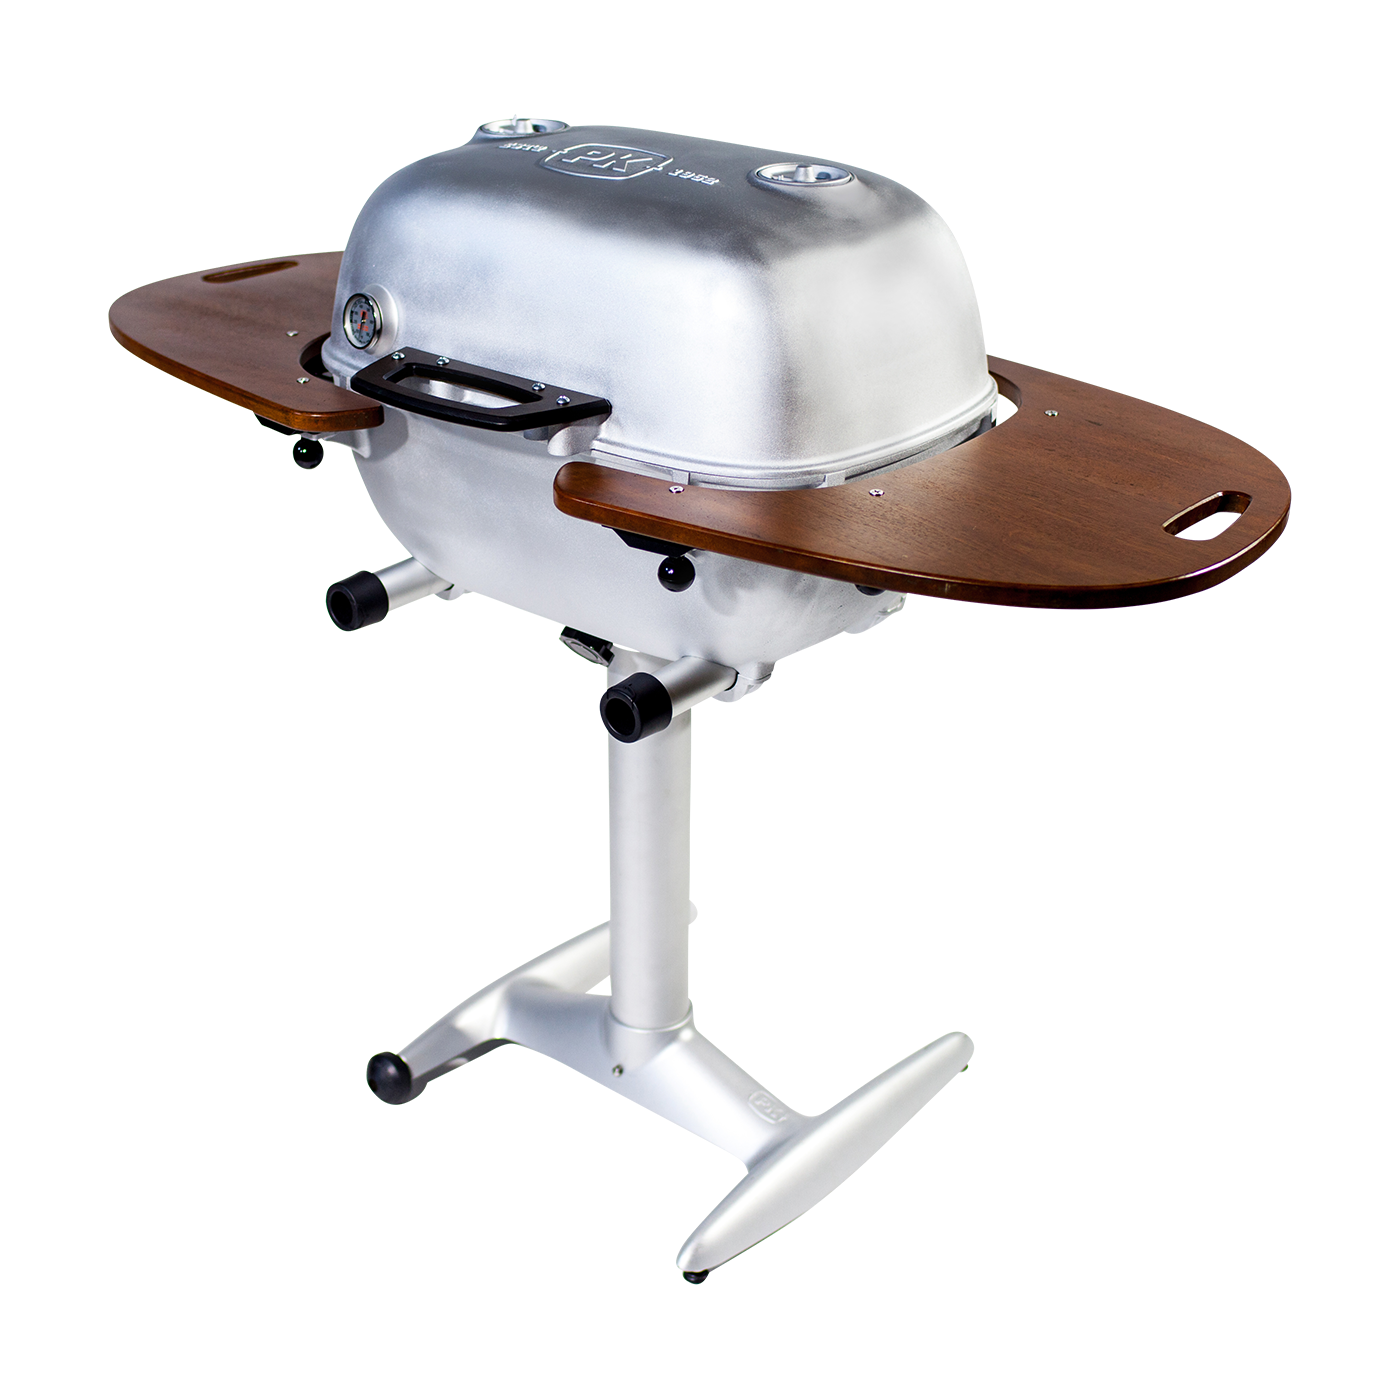 Heritage Grill Manufacturer Pk Grills Announces The Release Of First New Grill Model In Over Forty Years